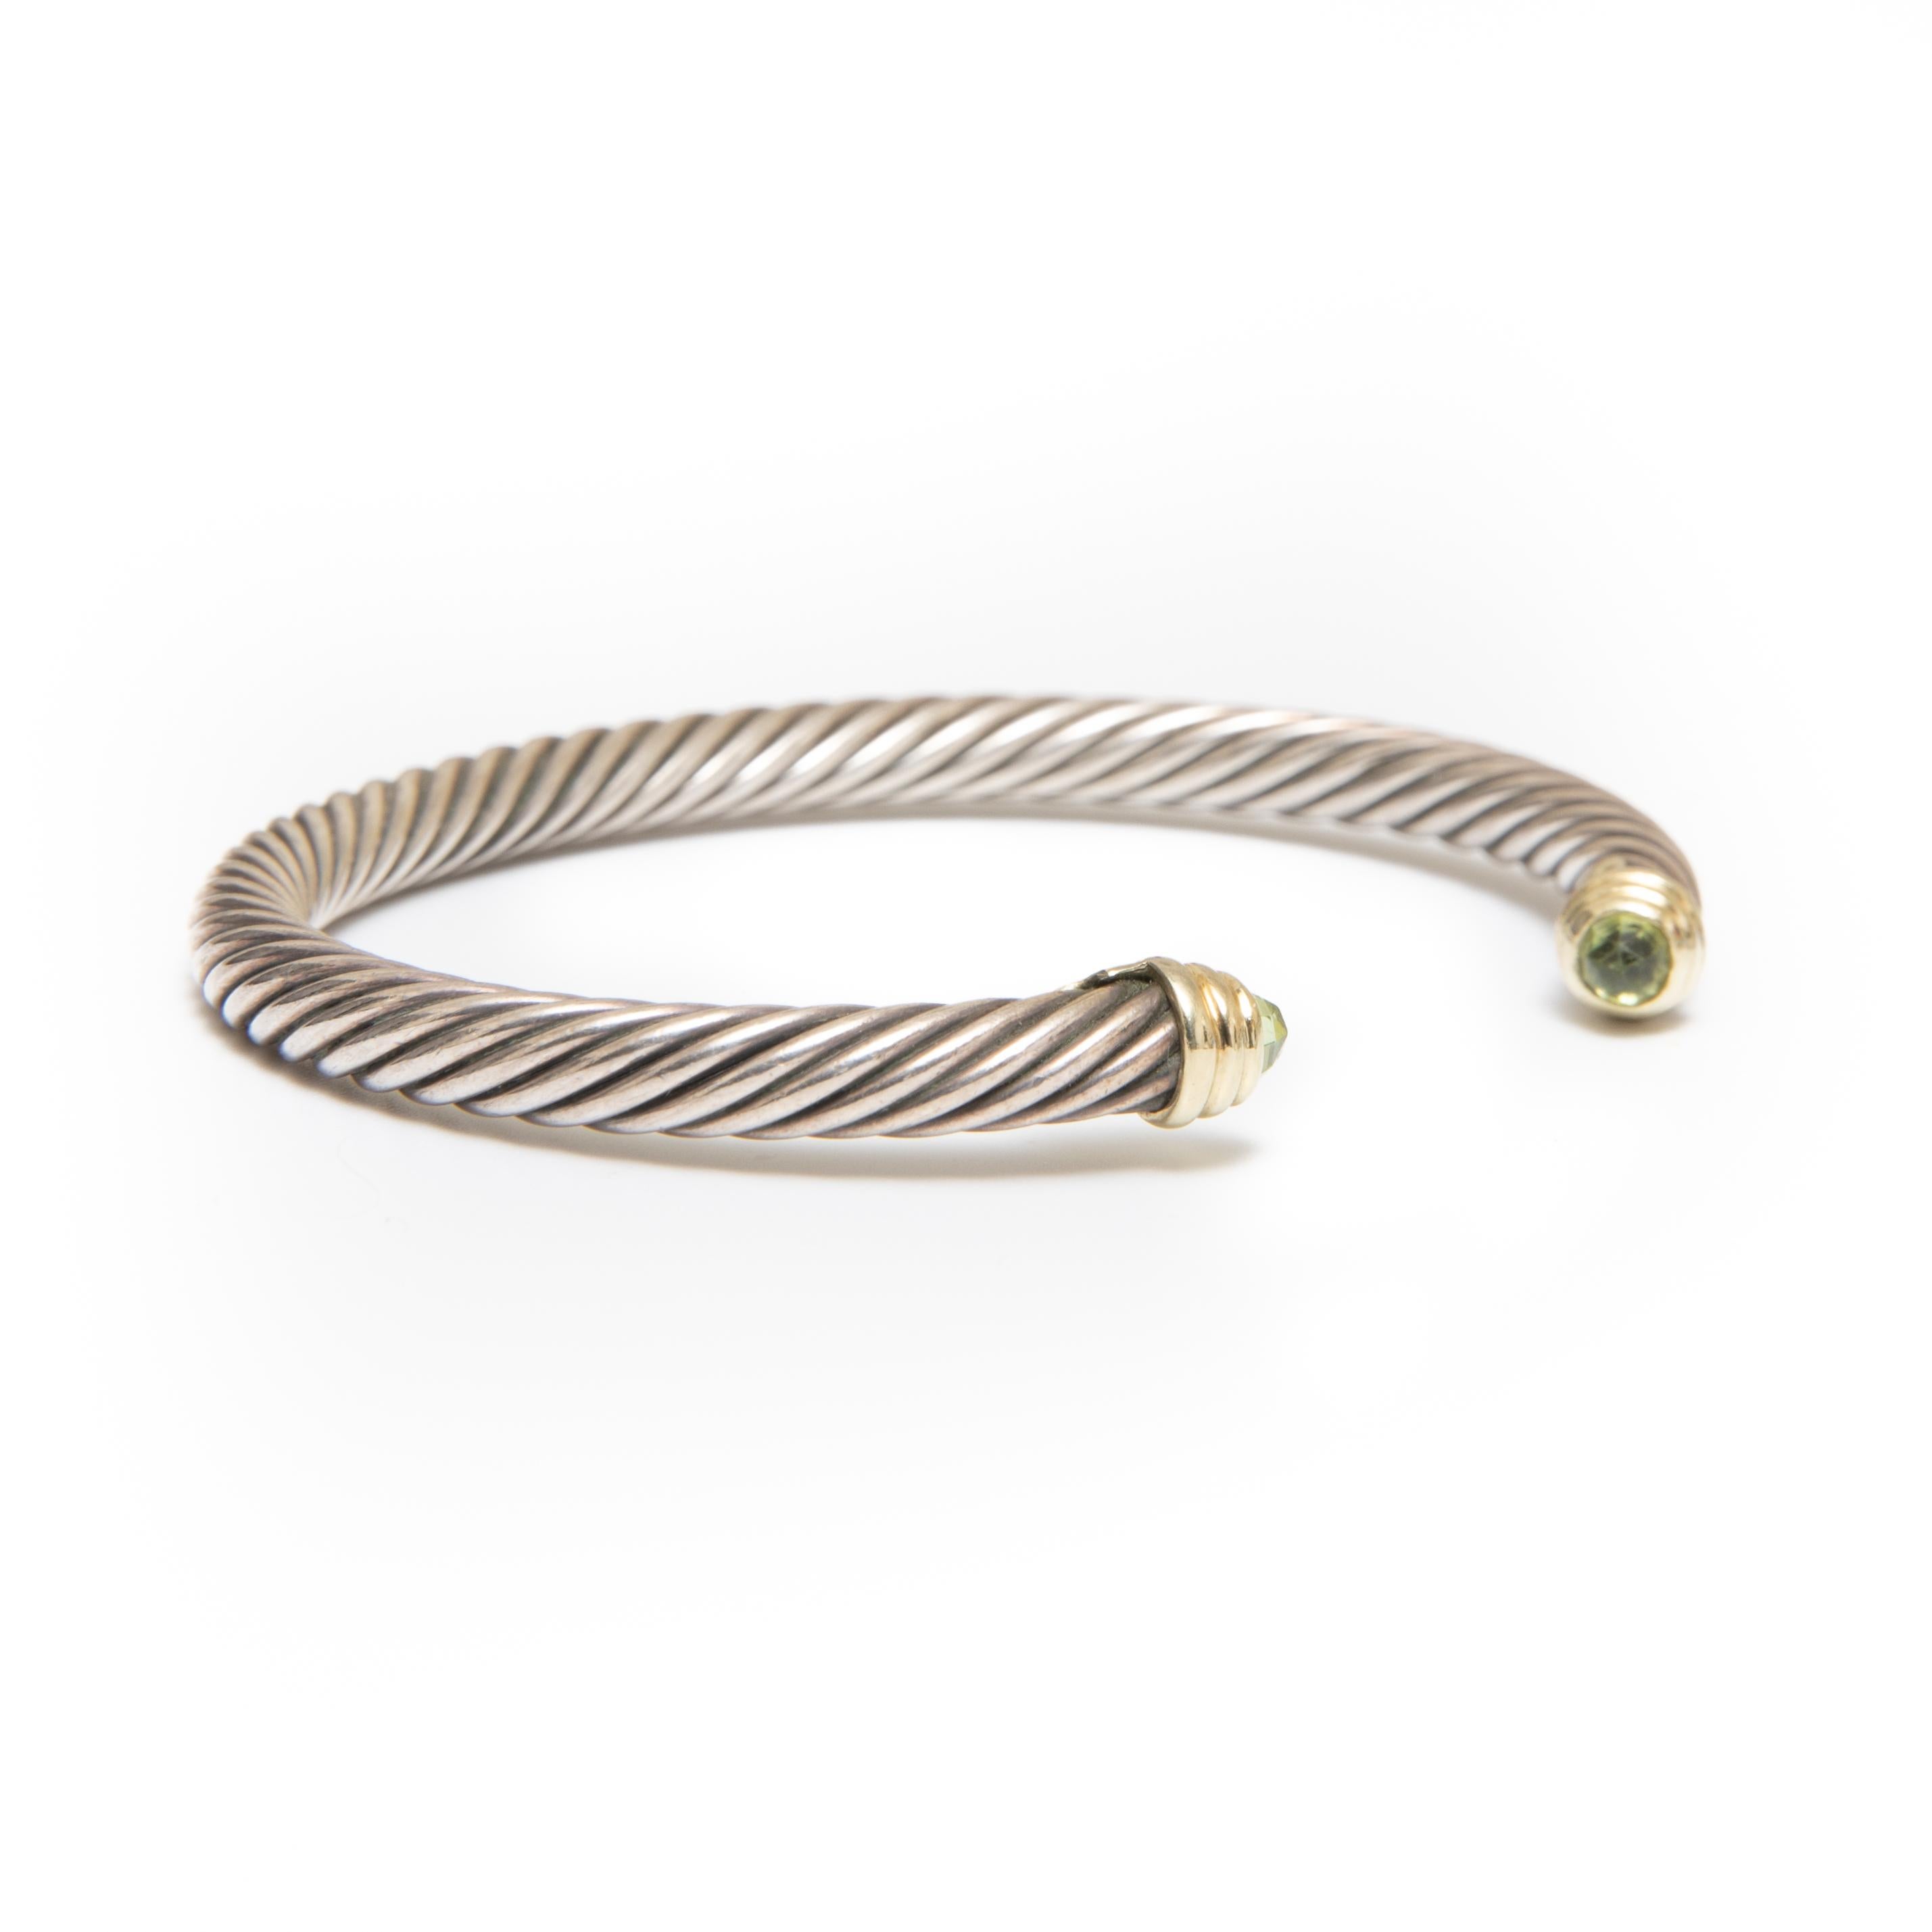 David Yurman Signed Two-Tone (Sterling Silver/14k Yellow Gold) Waverly Peridot  Cable Cuff Bracelet. The classic cable design element creates movement, texture, and depth, the ends contain a faceted with Peridot  and gold accents. 
David Yurman is a